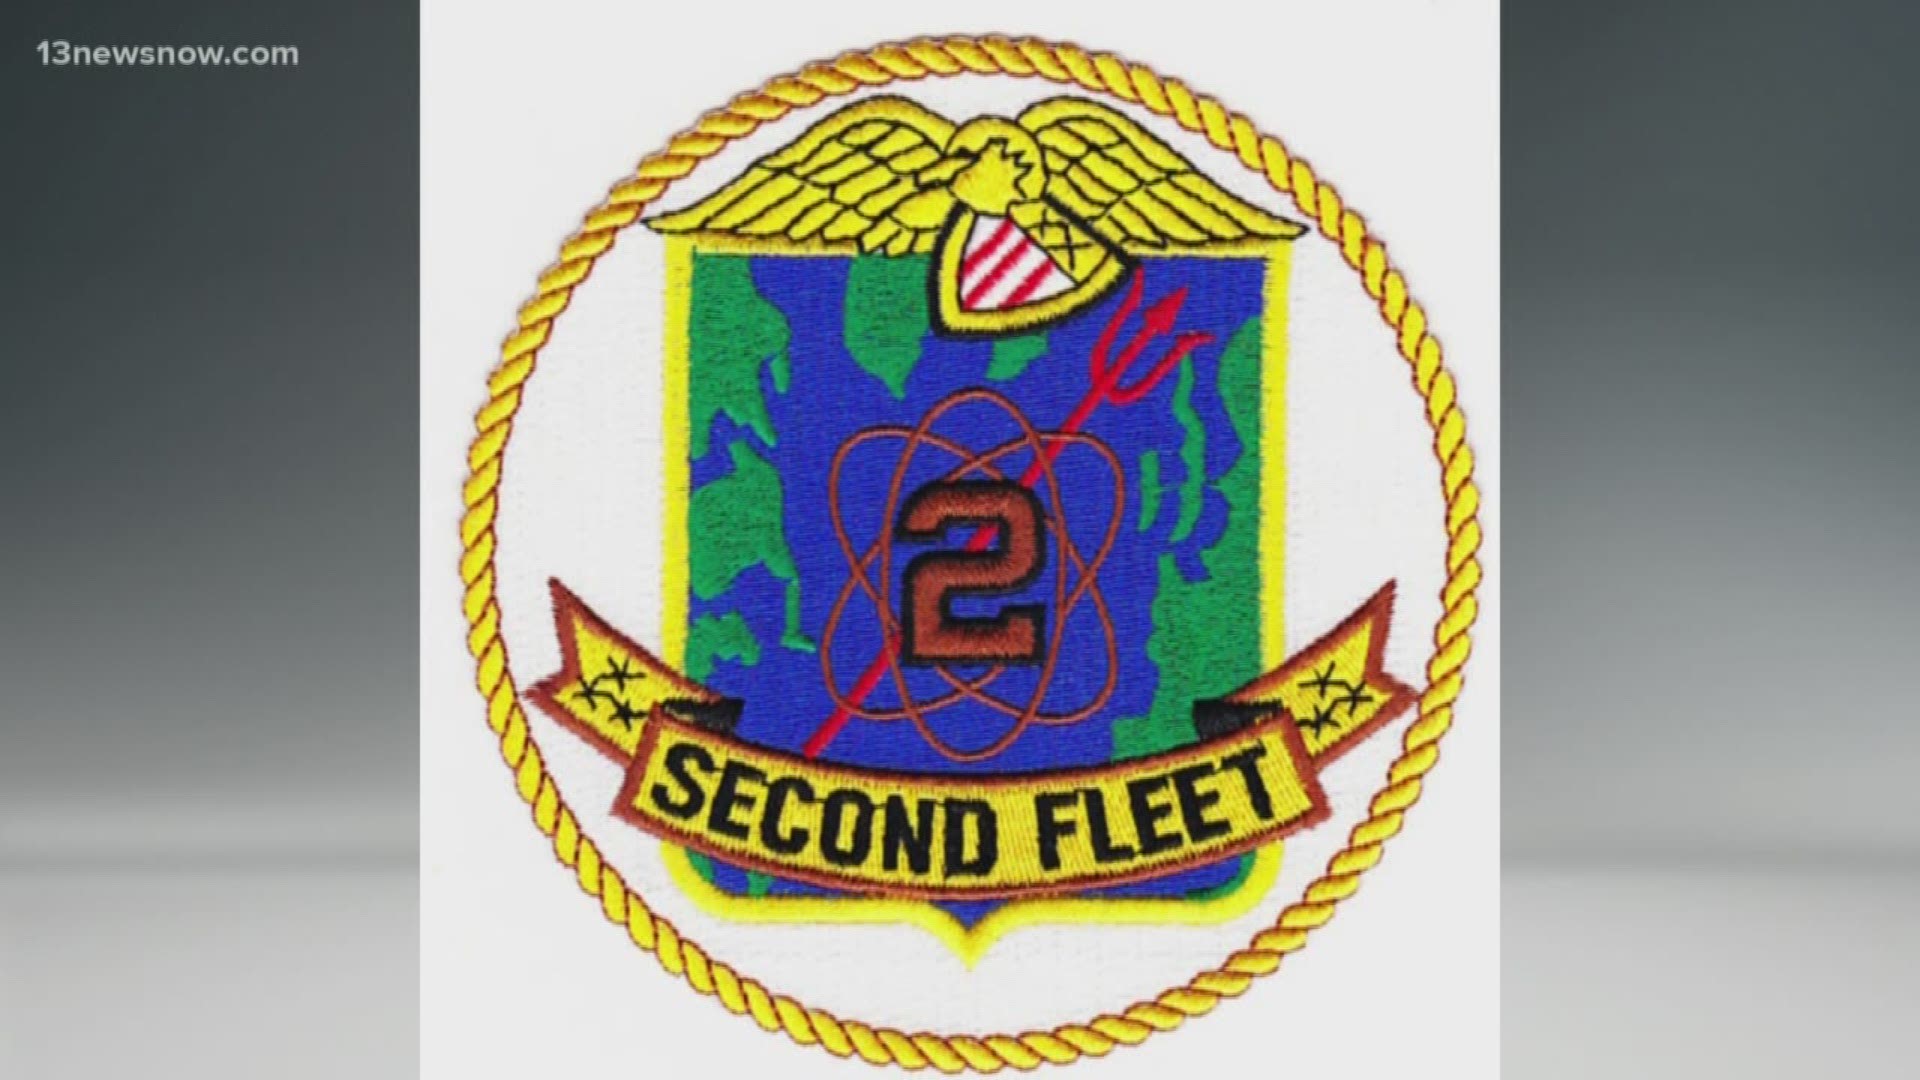 The original US 2nd Fleet was created in 1950 and played an important role in the confrontation with the Soviet Union during the Cold War. It was disbanded in 2011.